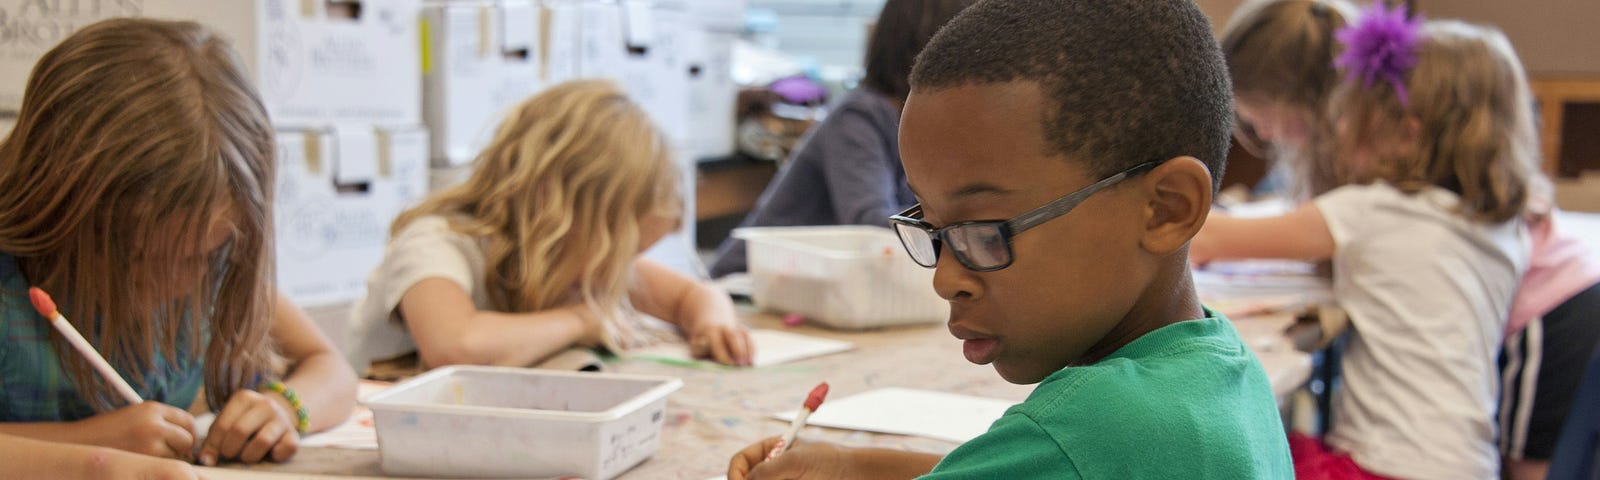 Children in school at a table writing and drawing with a black-skinned boy in a green T-shirt in the foreground and brown and blonde-haired girls in the background.